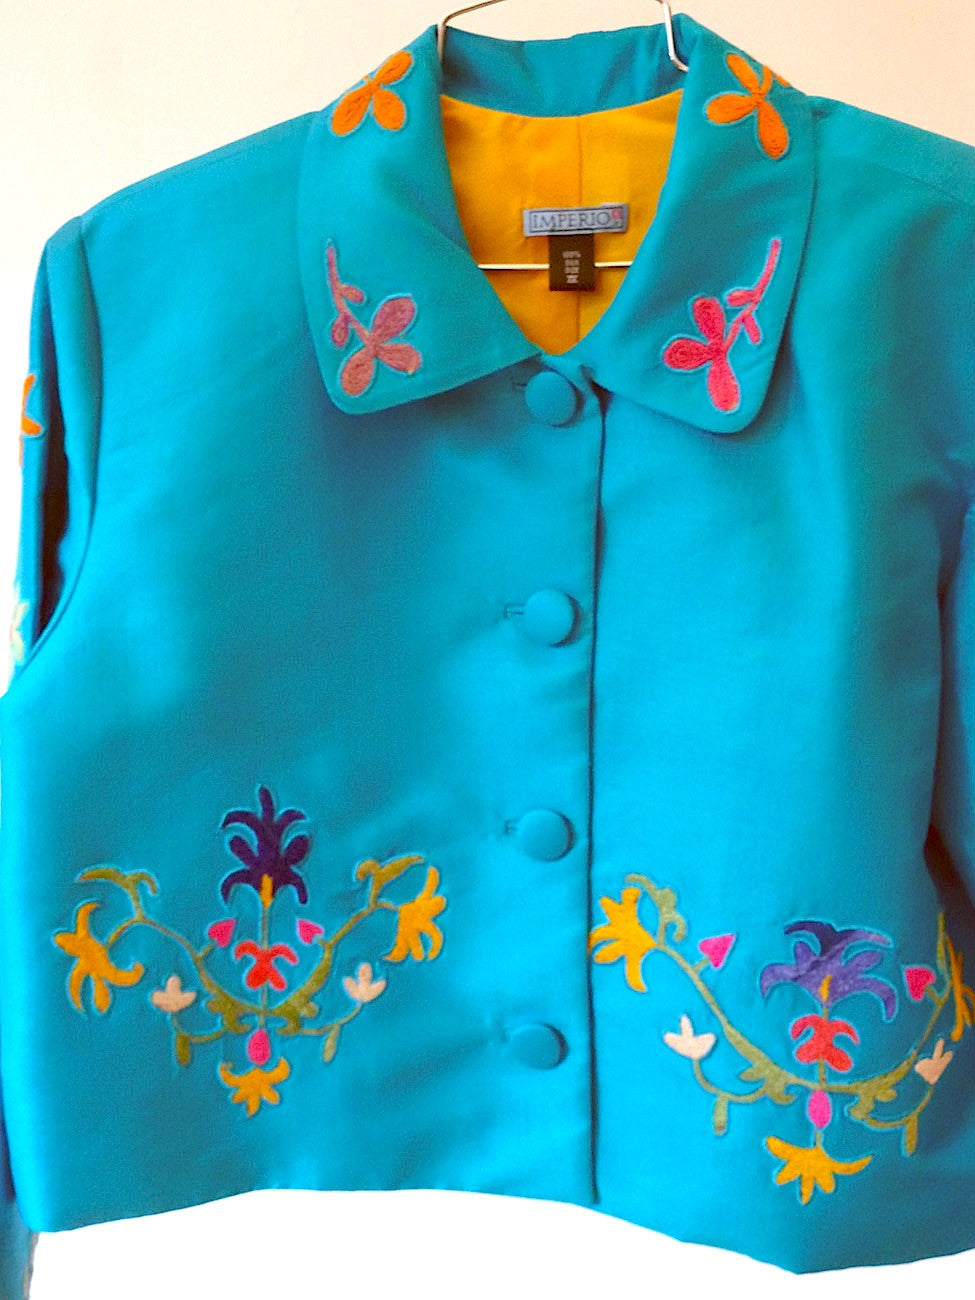 Couture Cut Peace Jacket Citron And Rainbow Swirl